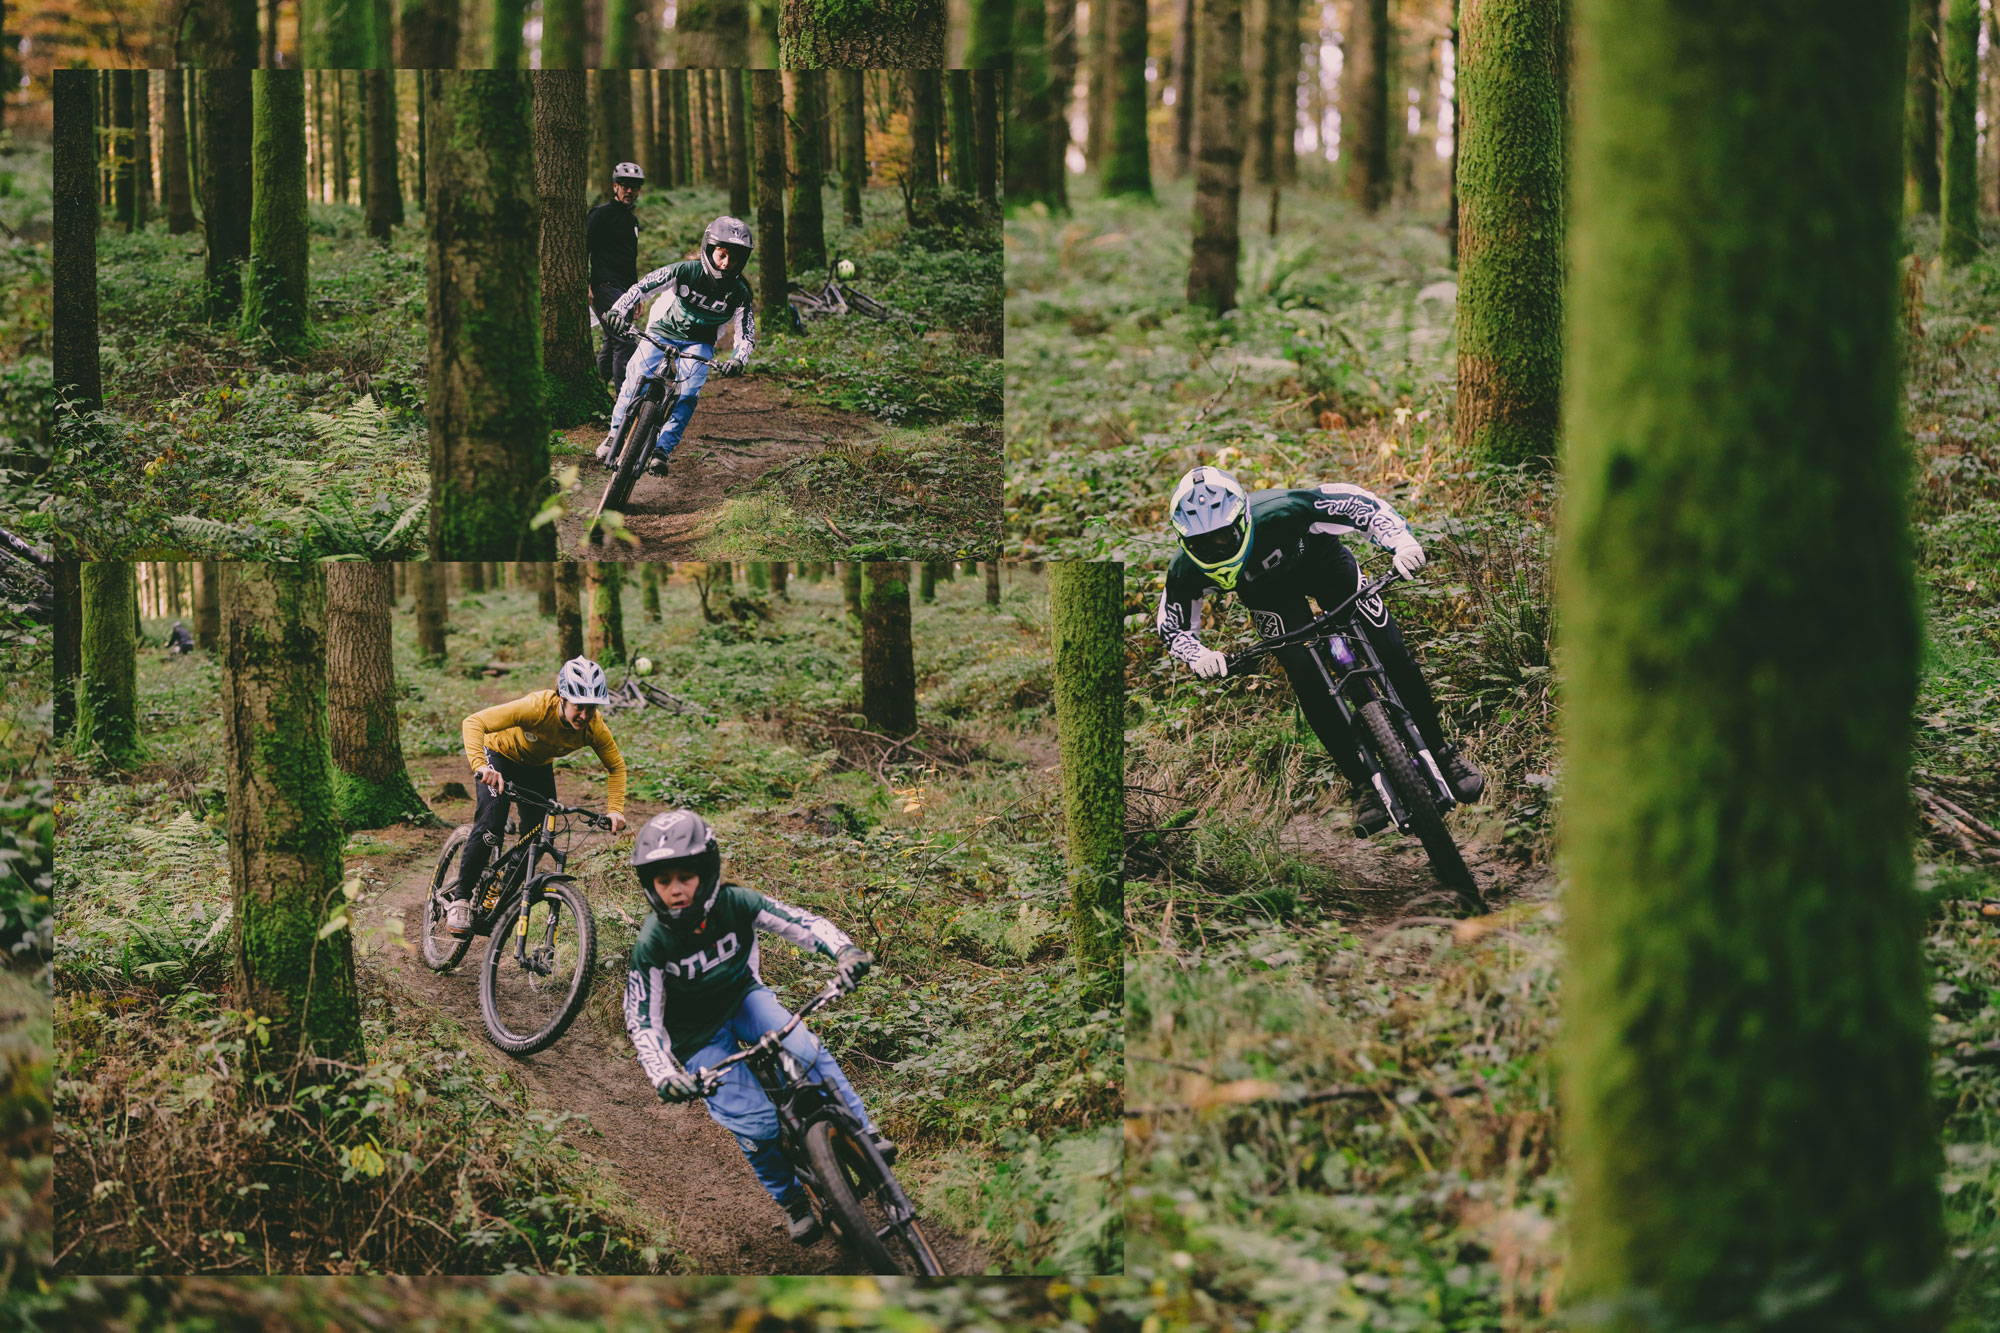 Montage of team riders ripping trails